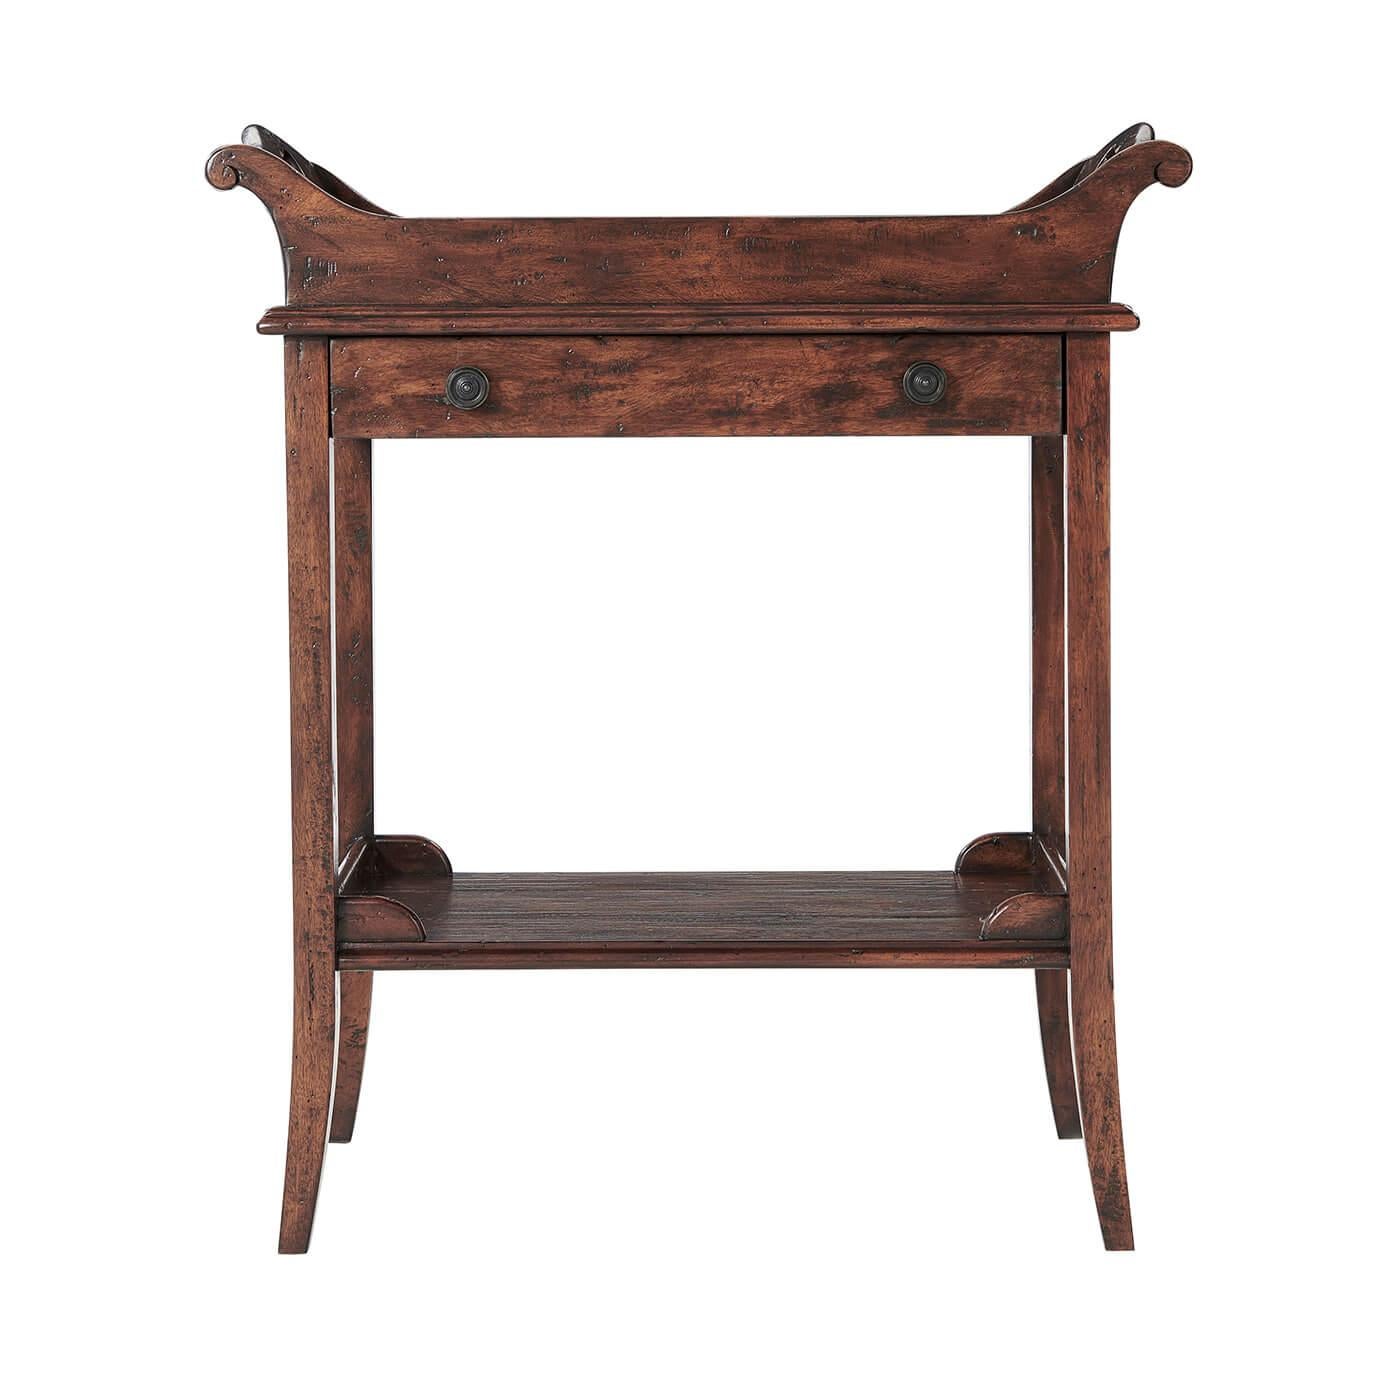 A George III style antiqued wood side table, the trough-shaped tray top with pierced handles above a frieze drawer, on splayed legs joined by a part galleried planked under tier. 

Dimensions: 28